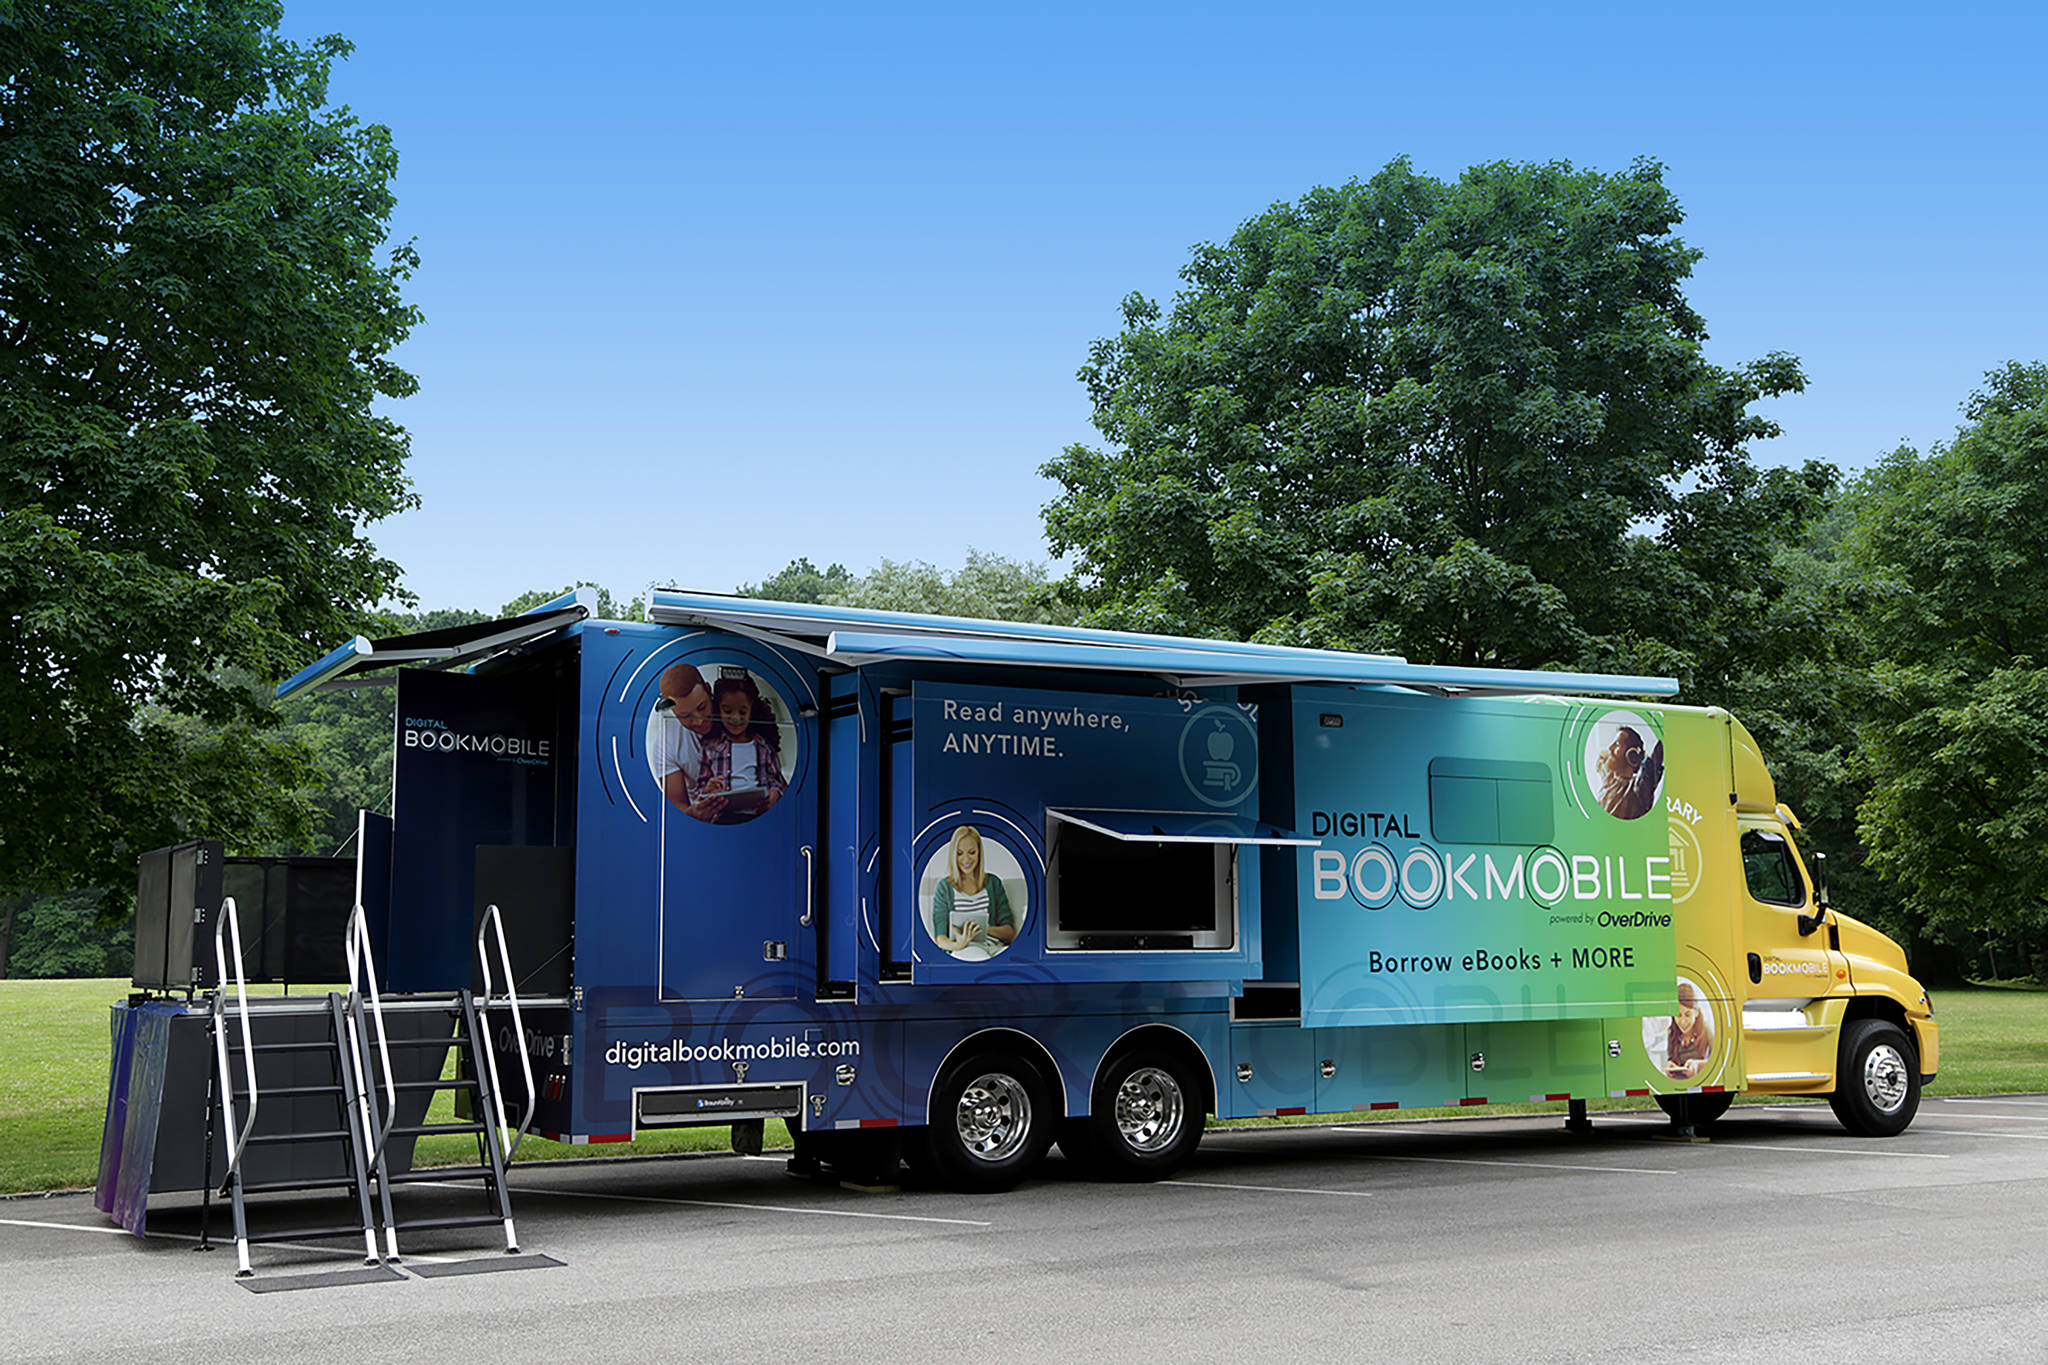 Learn about comics, Digital Bookmobile at Marysville Library